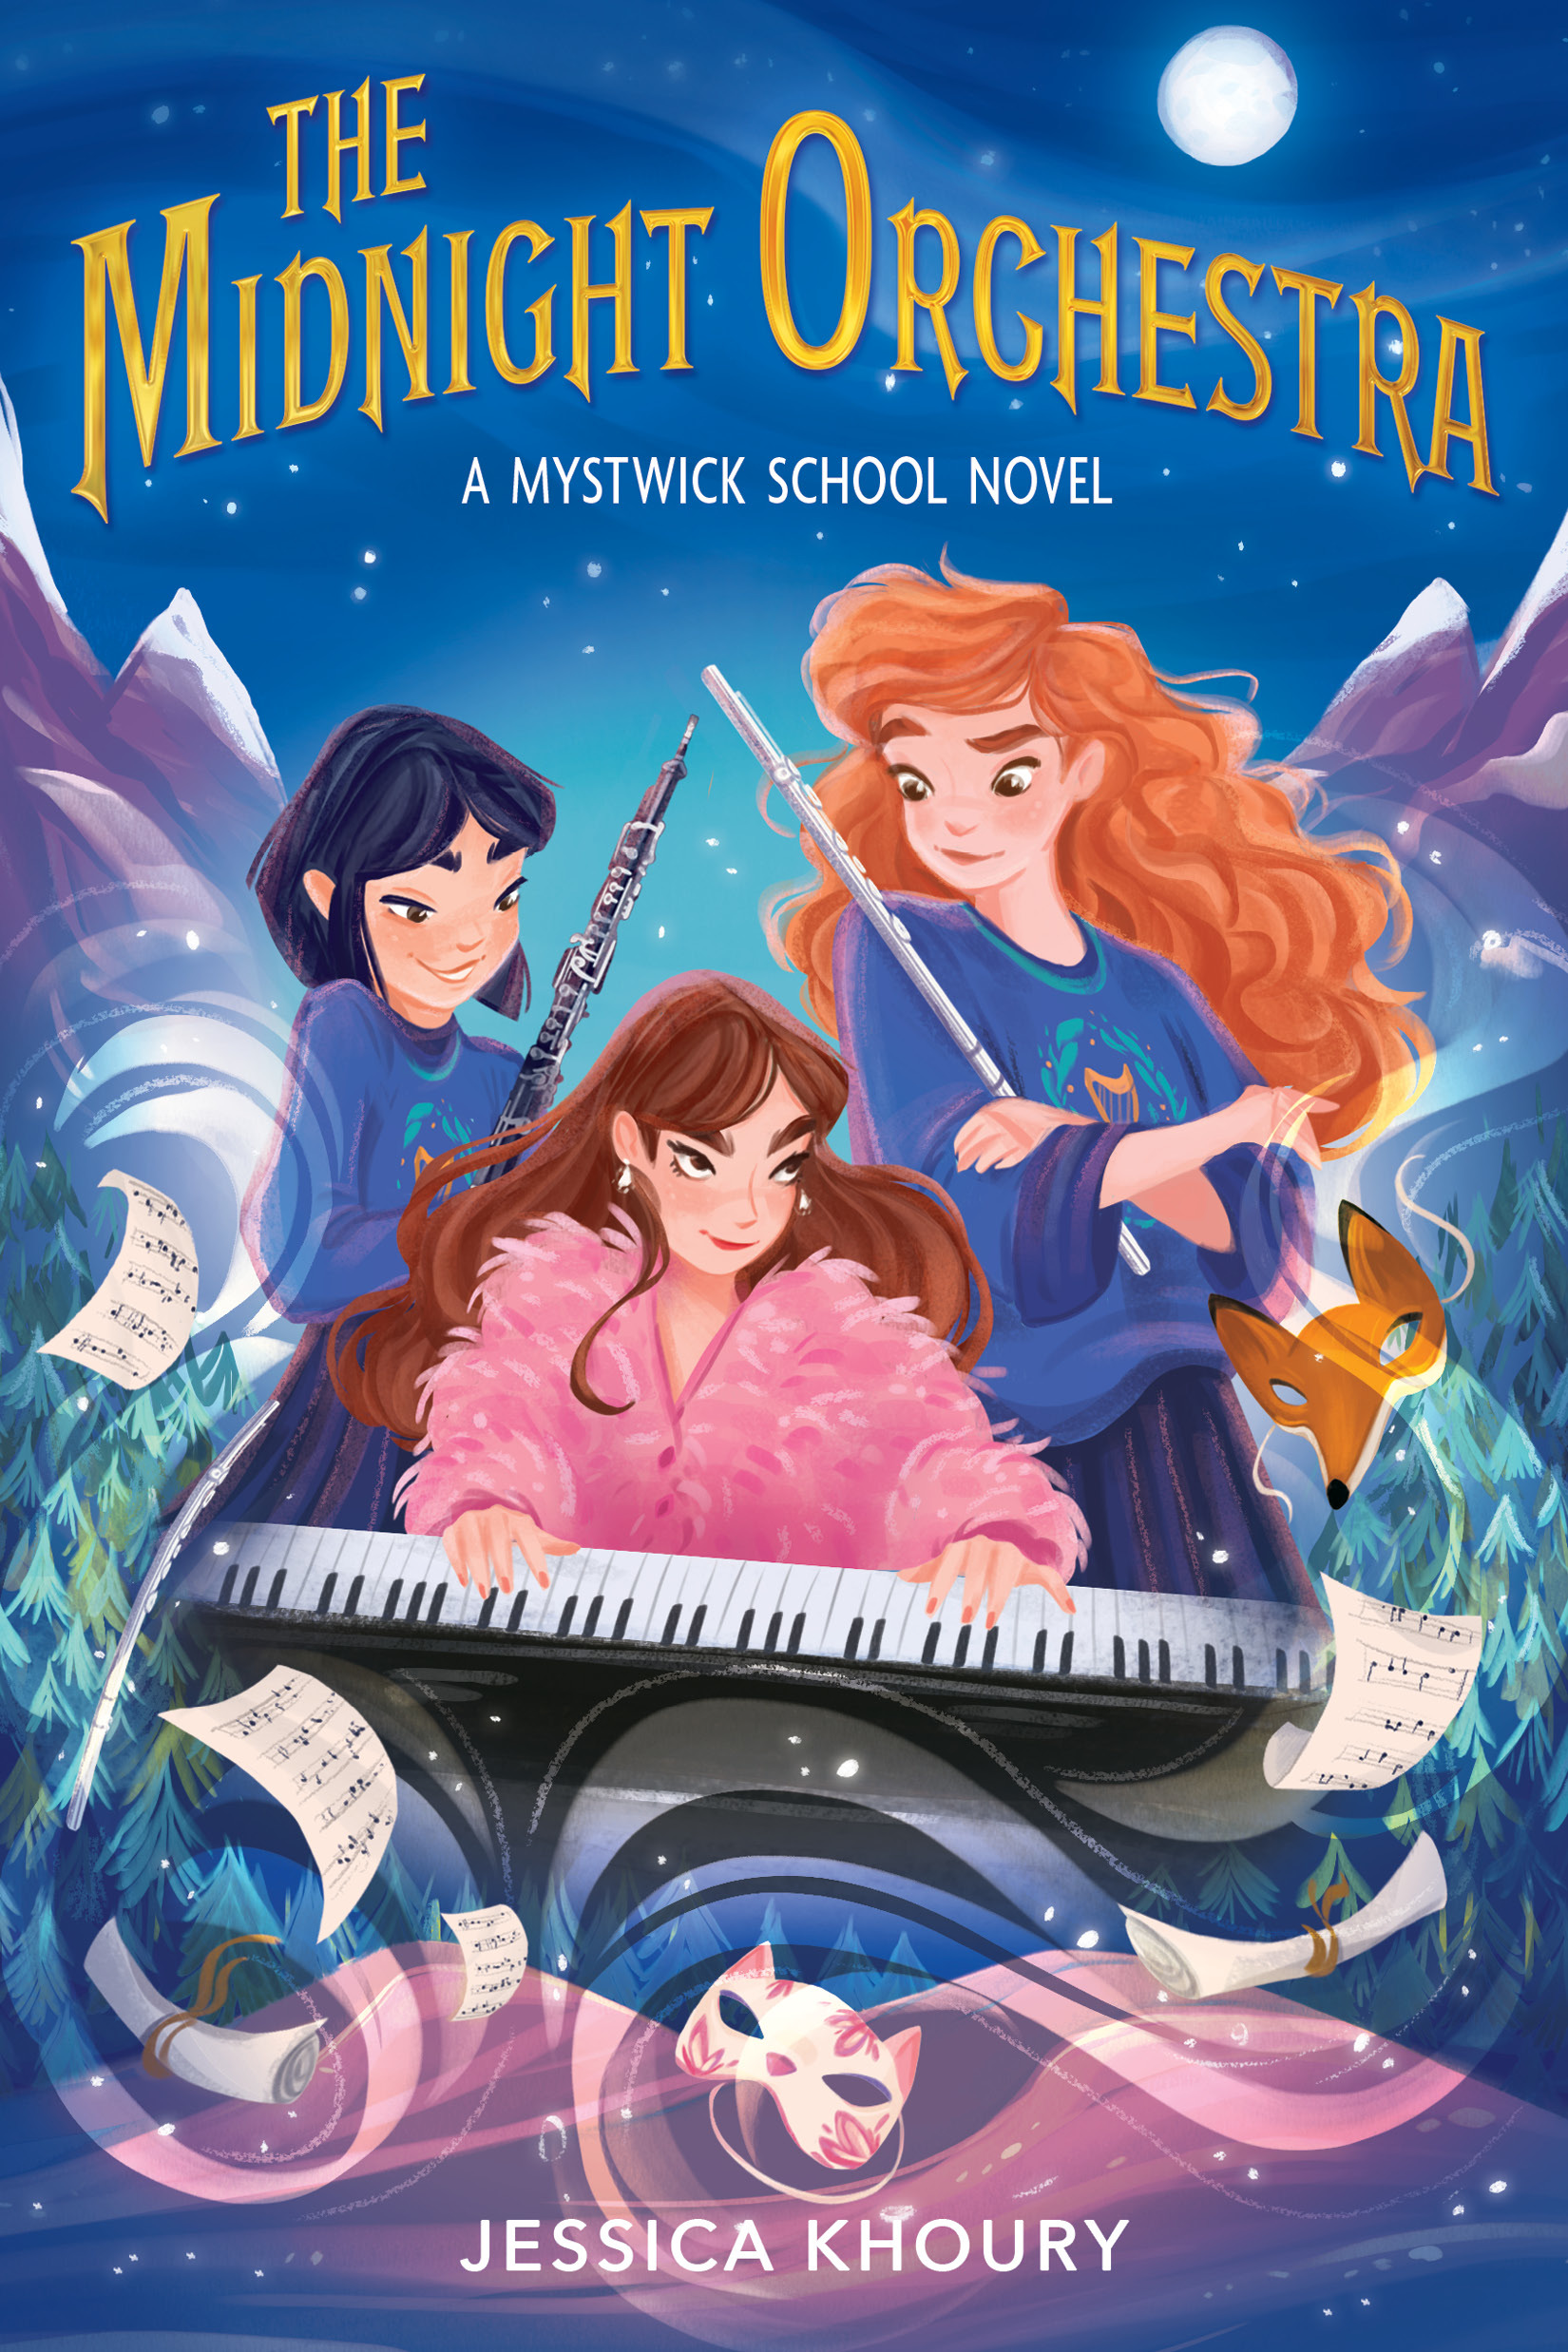 The Midnight Orchestra (The Mystwick School of Musicraft, Book 2) by Jessica Khoury